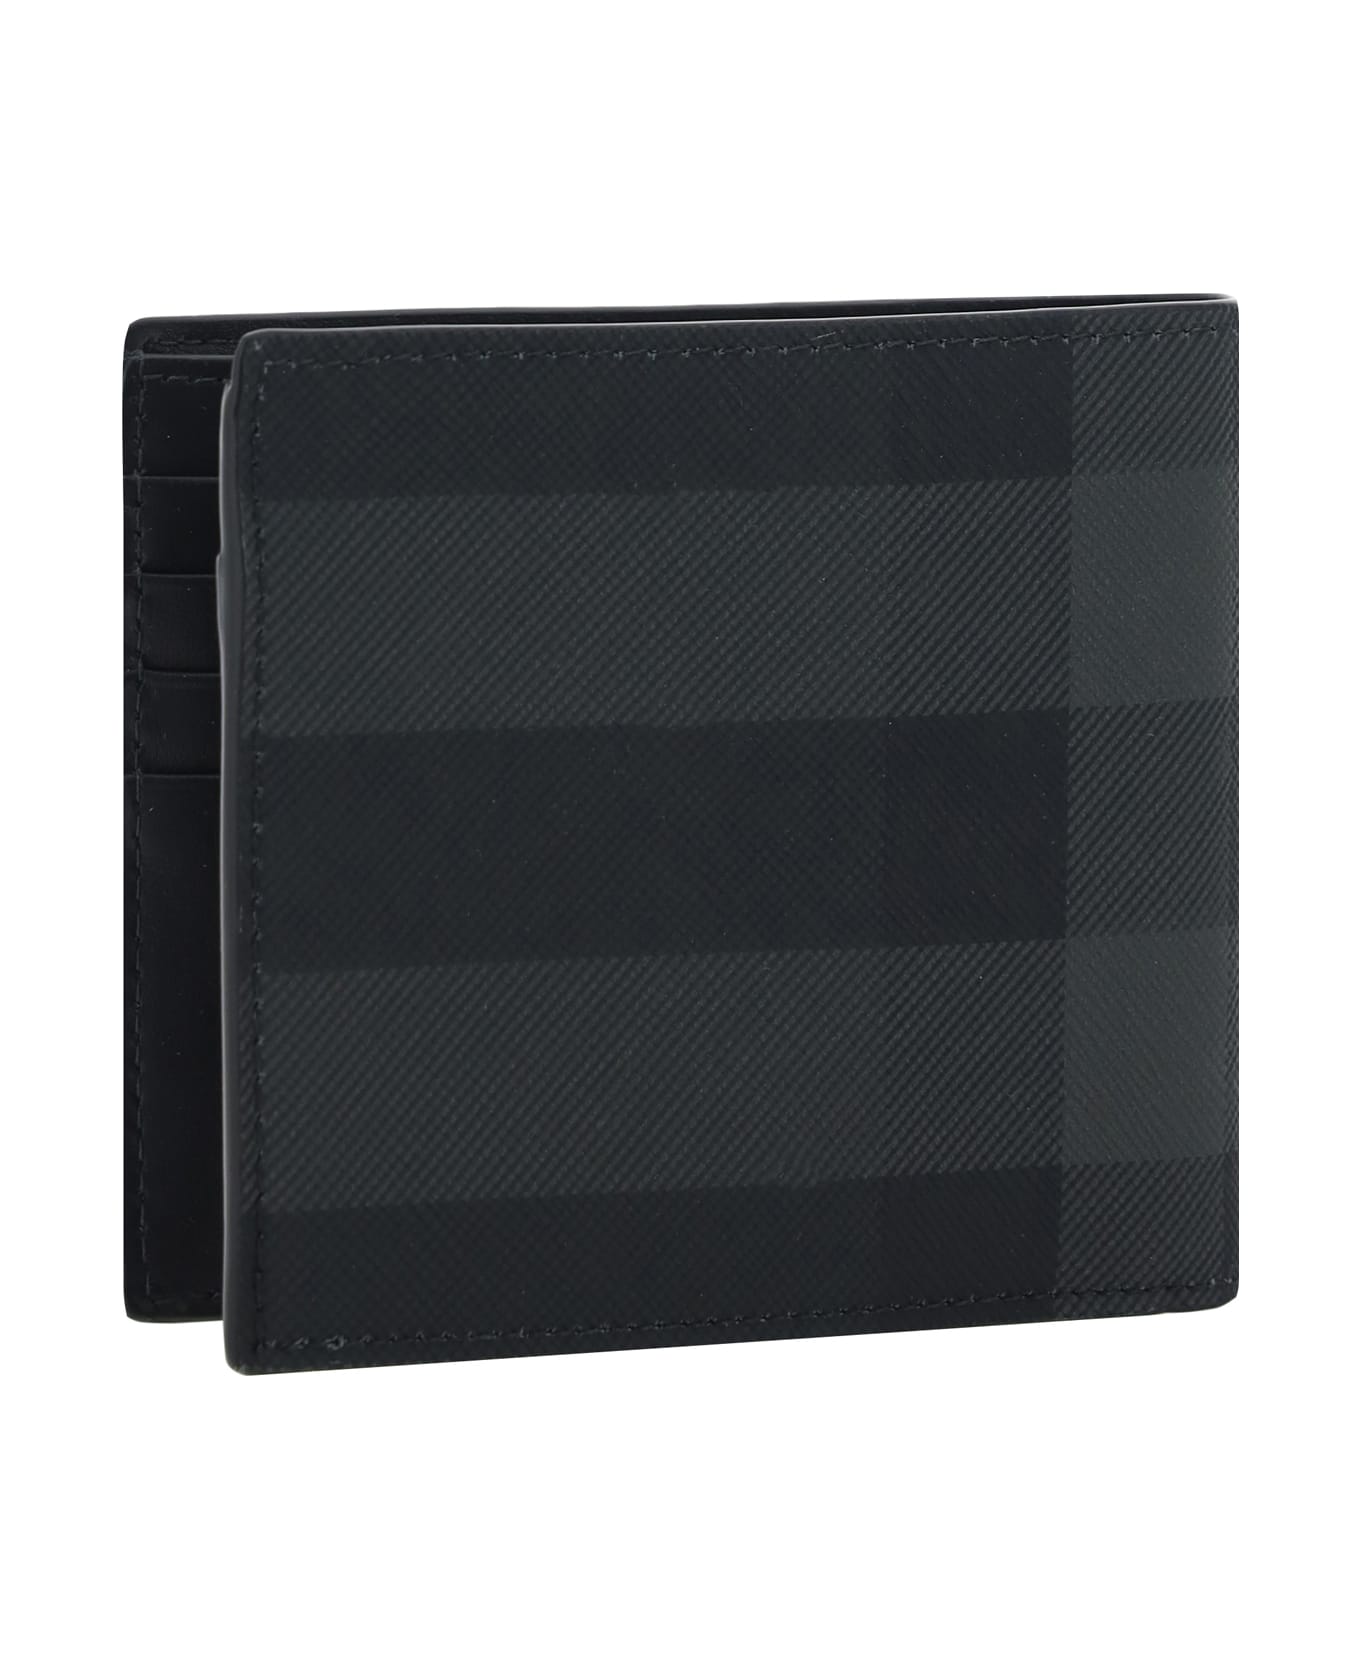 Burberry Wallet - Charcoal